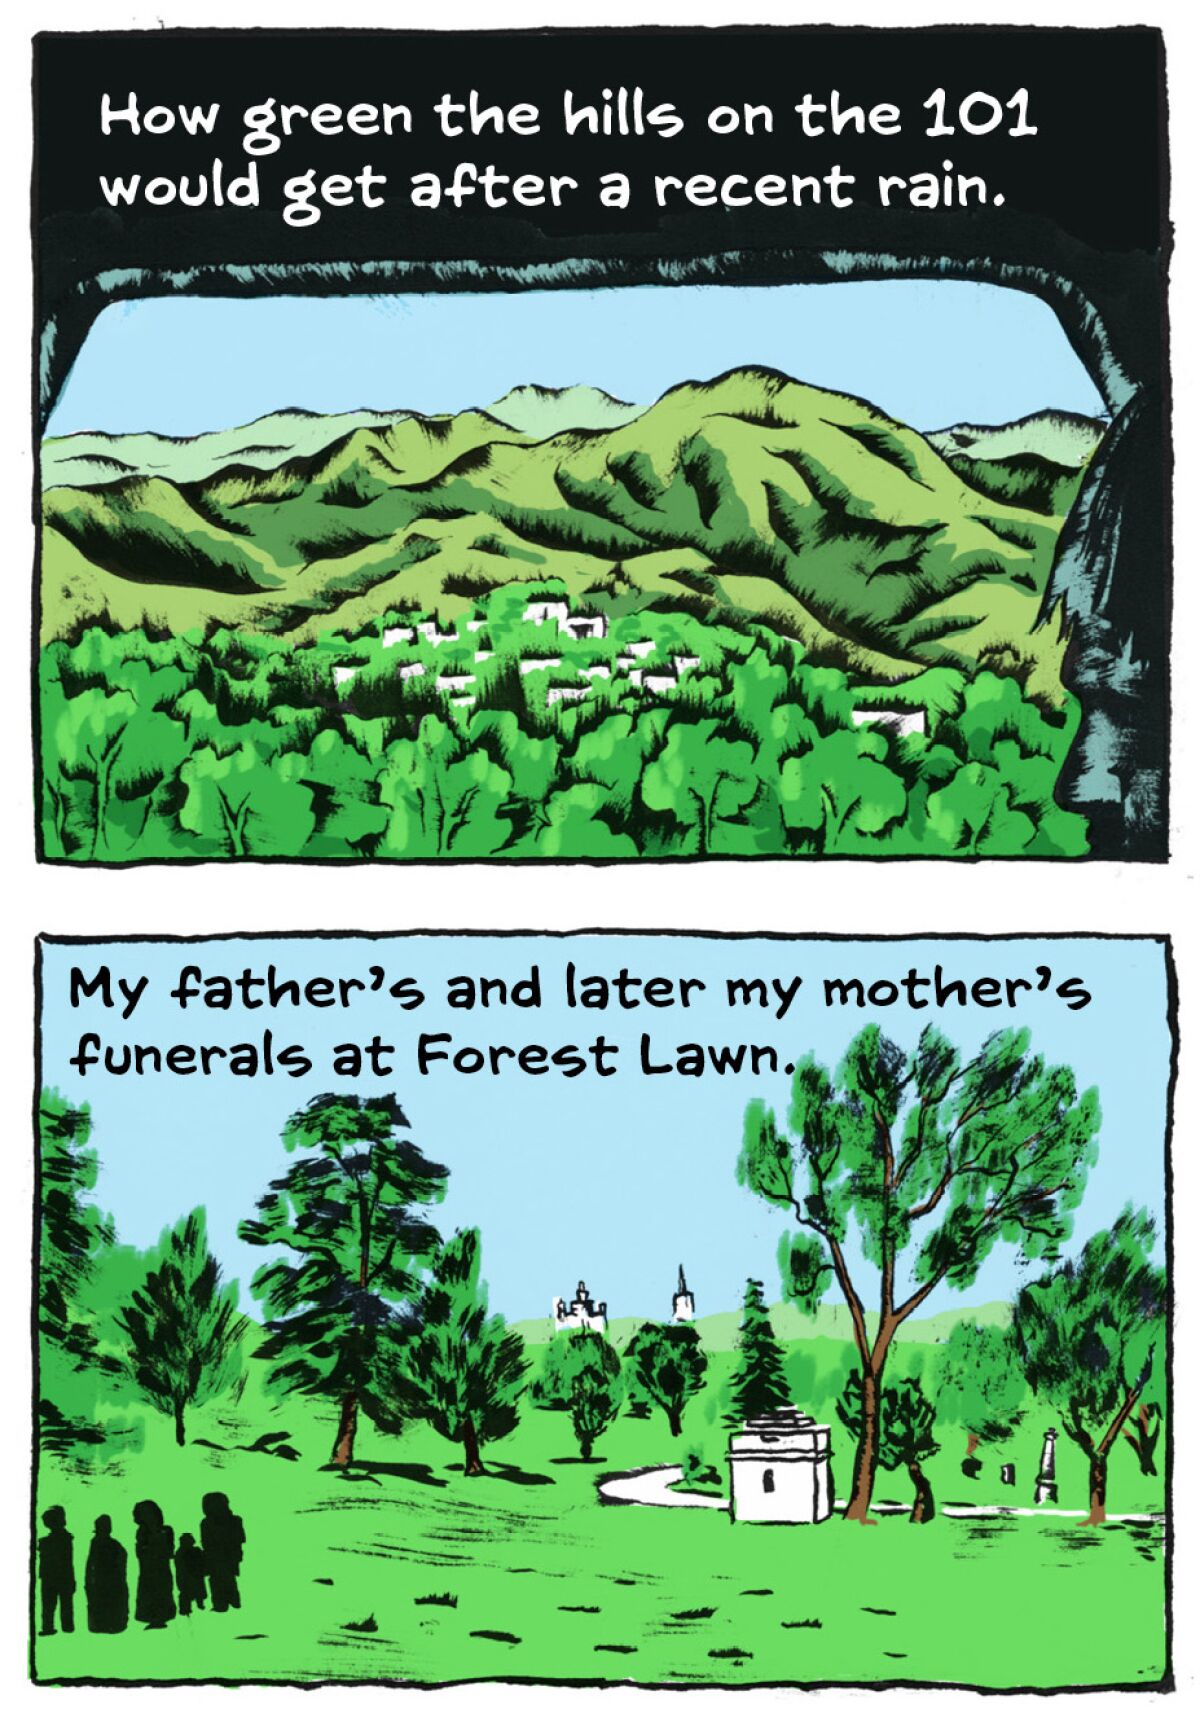 Illustrations of verdant hills and funerals at a cemetery